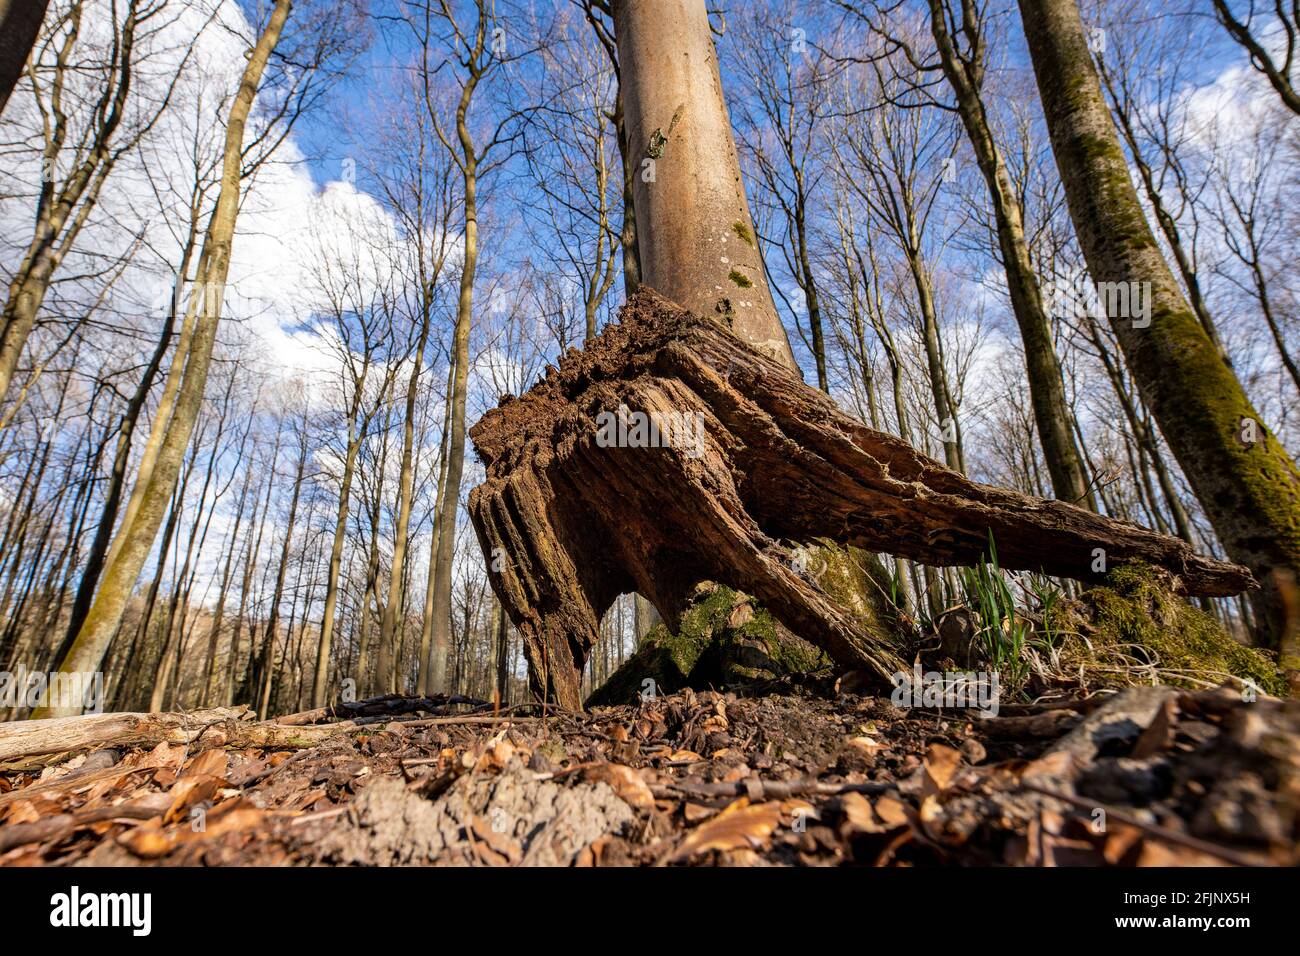 Deciduous tree trunk covered with moss. Old tree limbs in Central Europe. Spring season. Stock Photo